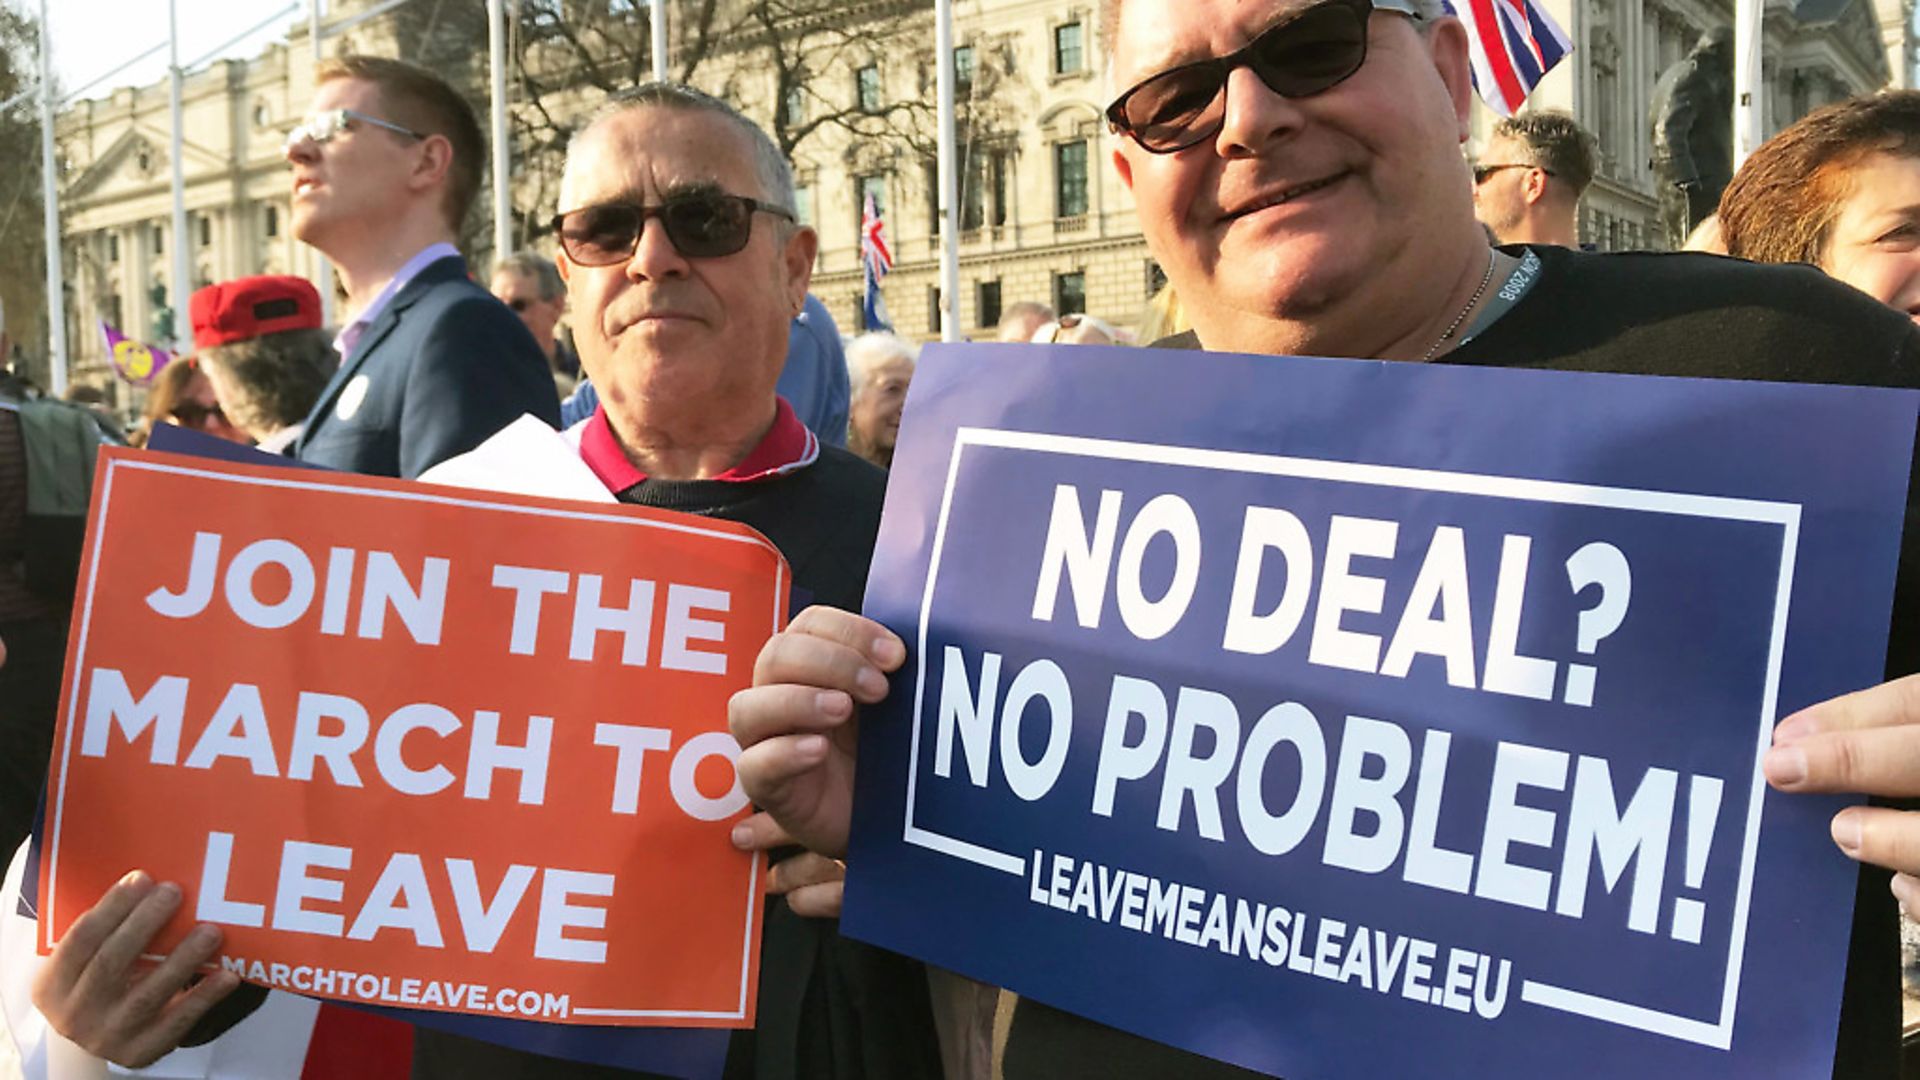 Brexit demonstrators Les Curtis (left) and Ray Finch (right) in Parliament square London. They were hoping for a no-deal Brexit. Photograph: Tess De La Mere/PA. - Credit: PA Wire/PA Images